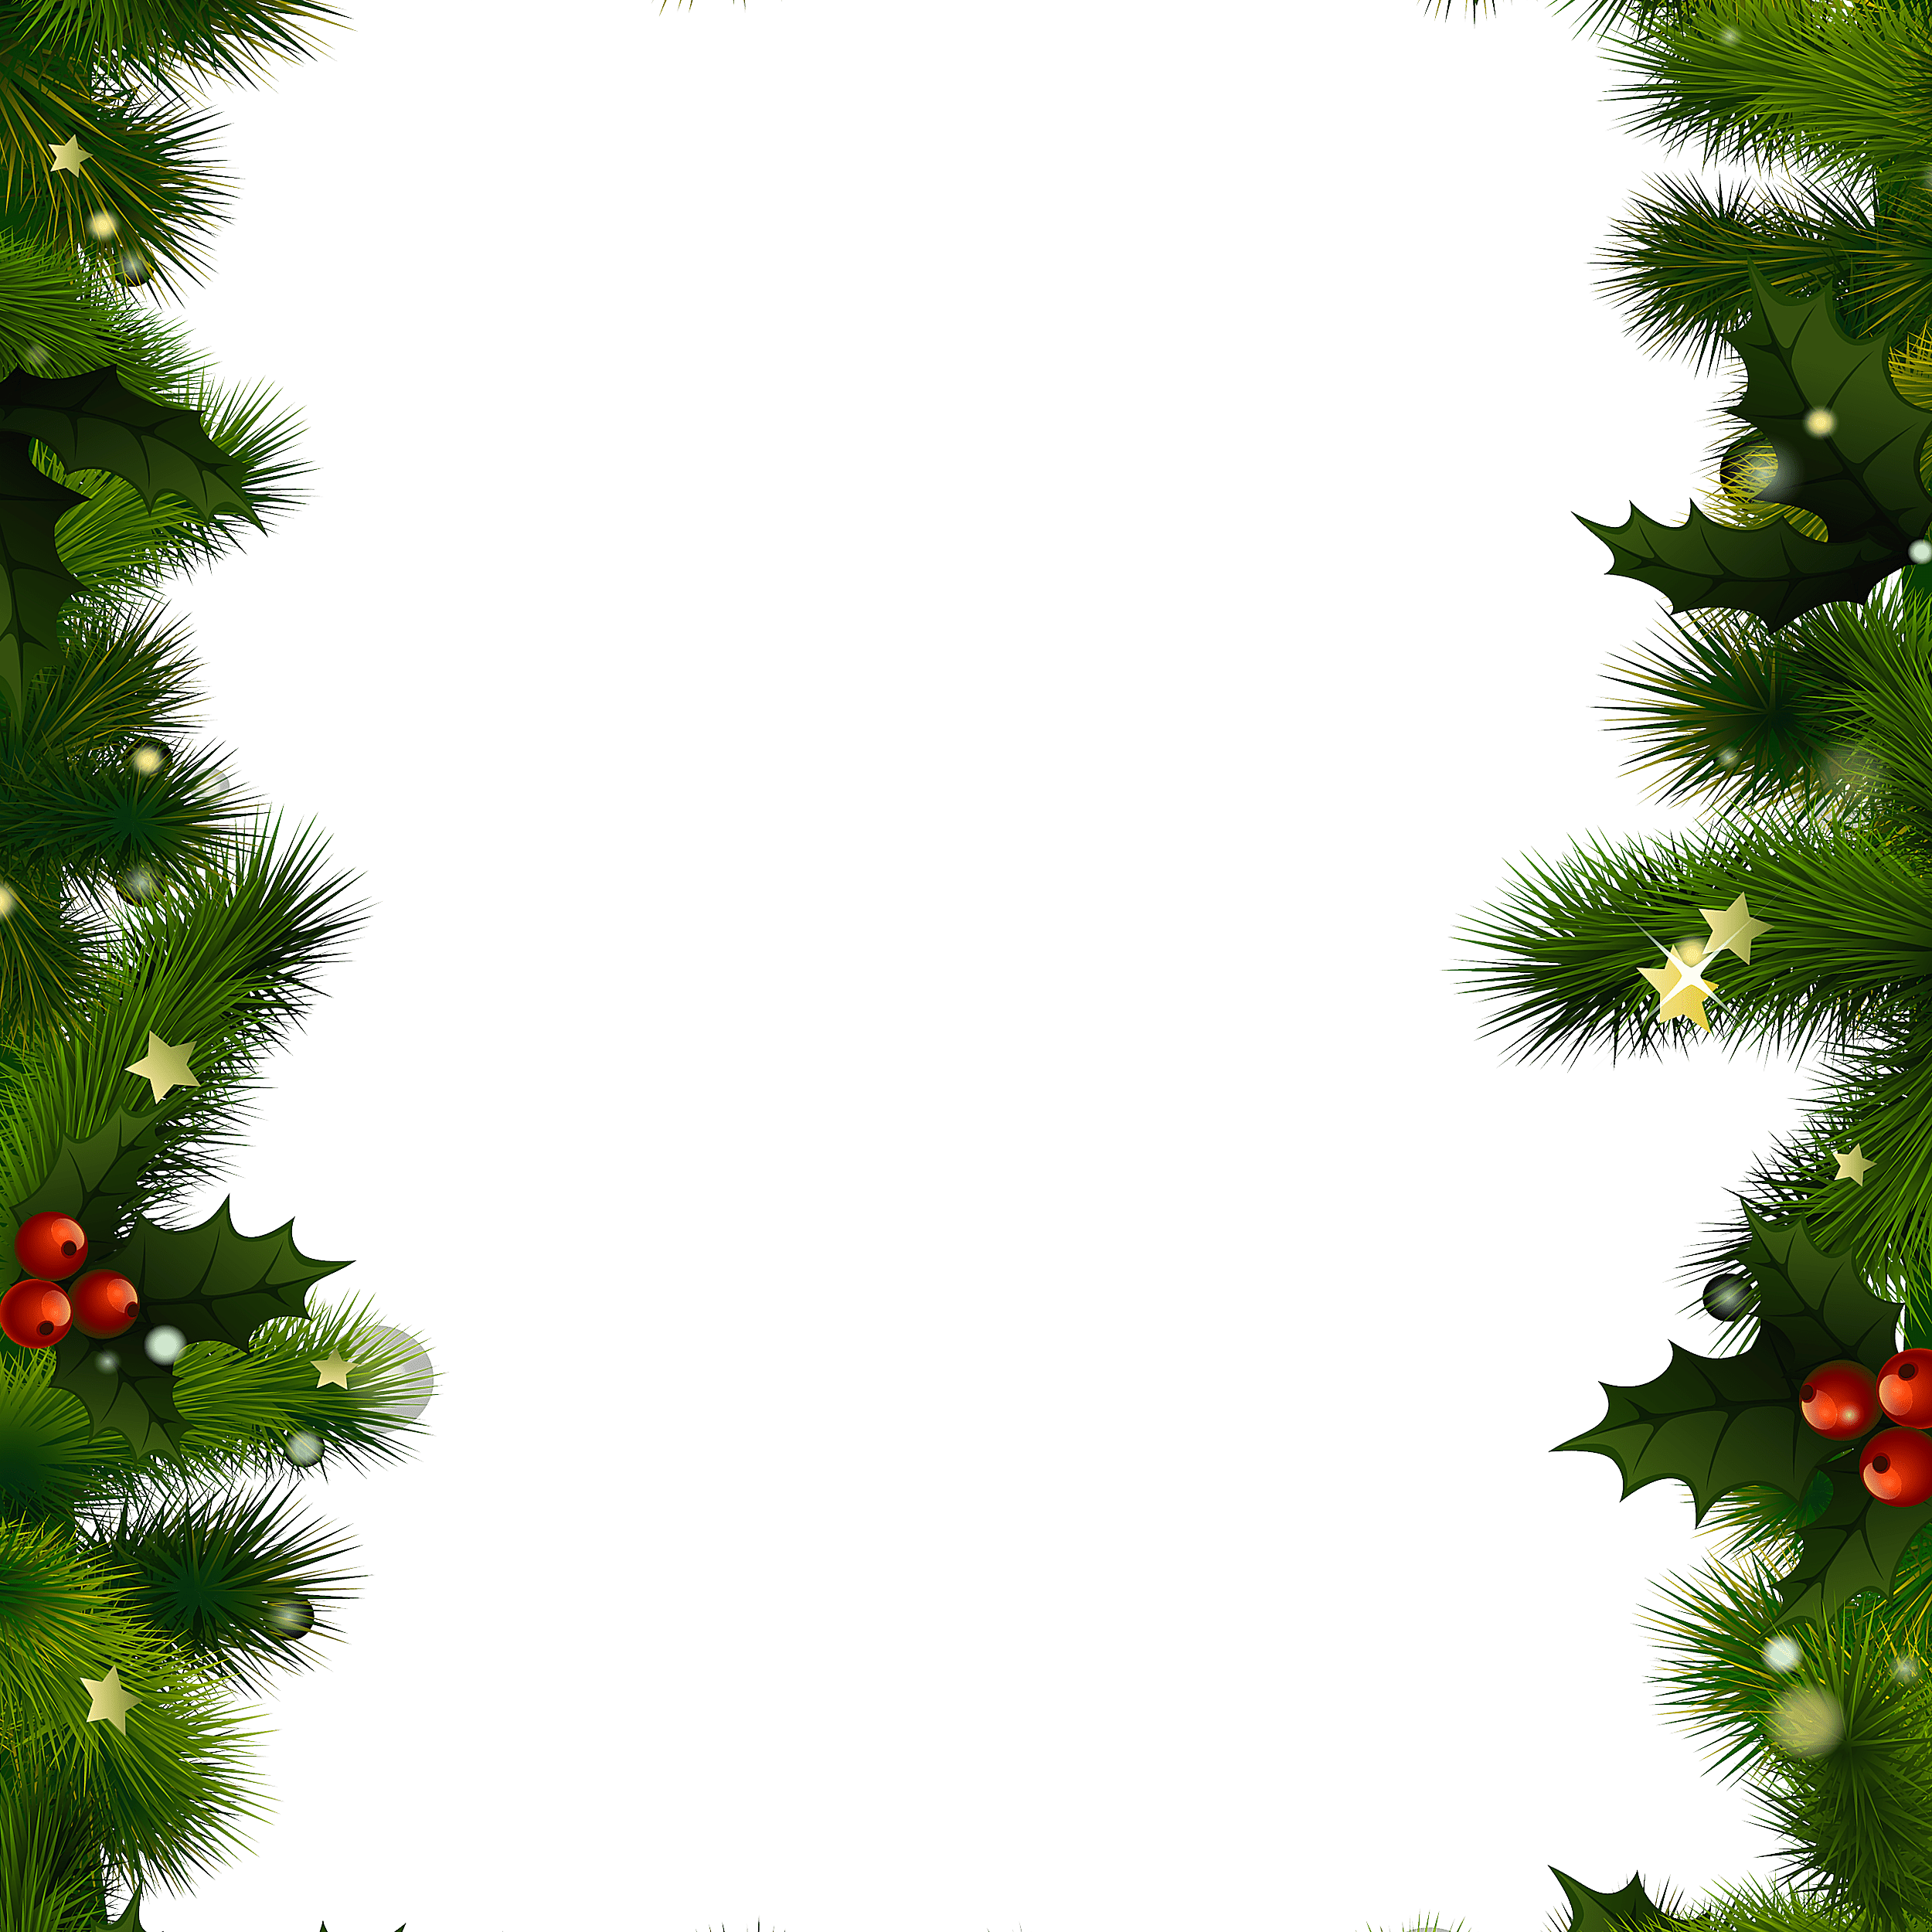 The Best Free Christmas Borders and Frames